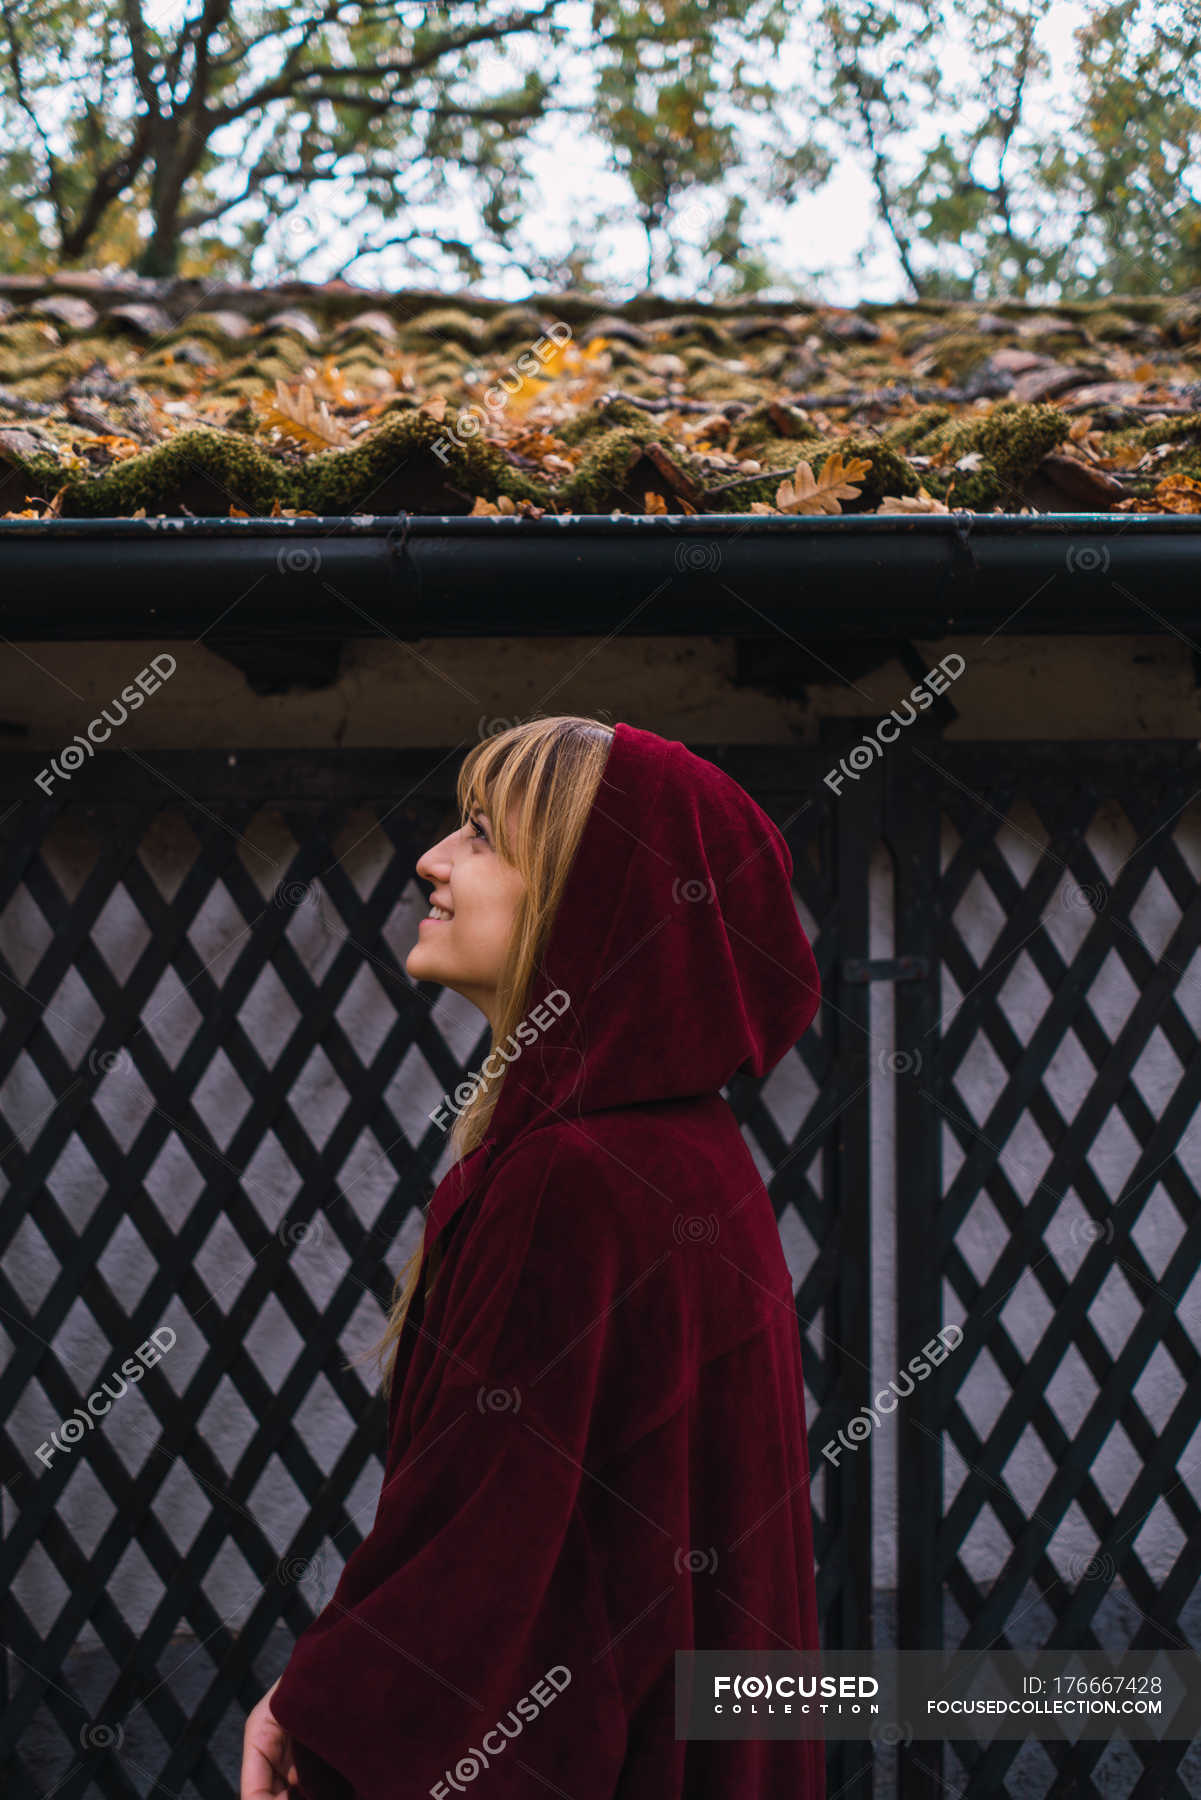 Download Side View Of Brunette Girl Wearing Red Hoodie Jacket Posing Against Fence At Park Nature Posture Stock Photo 176667428